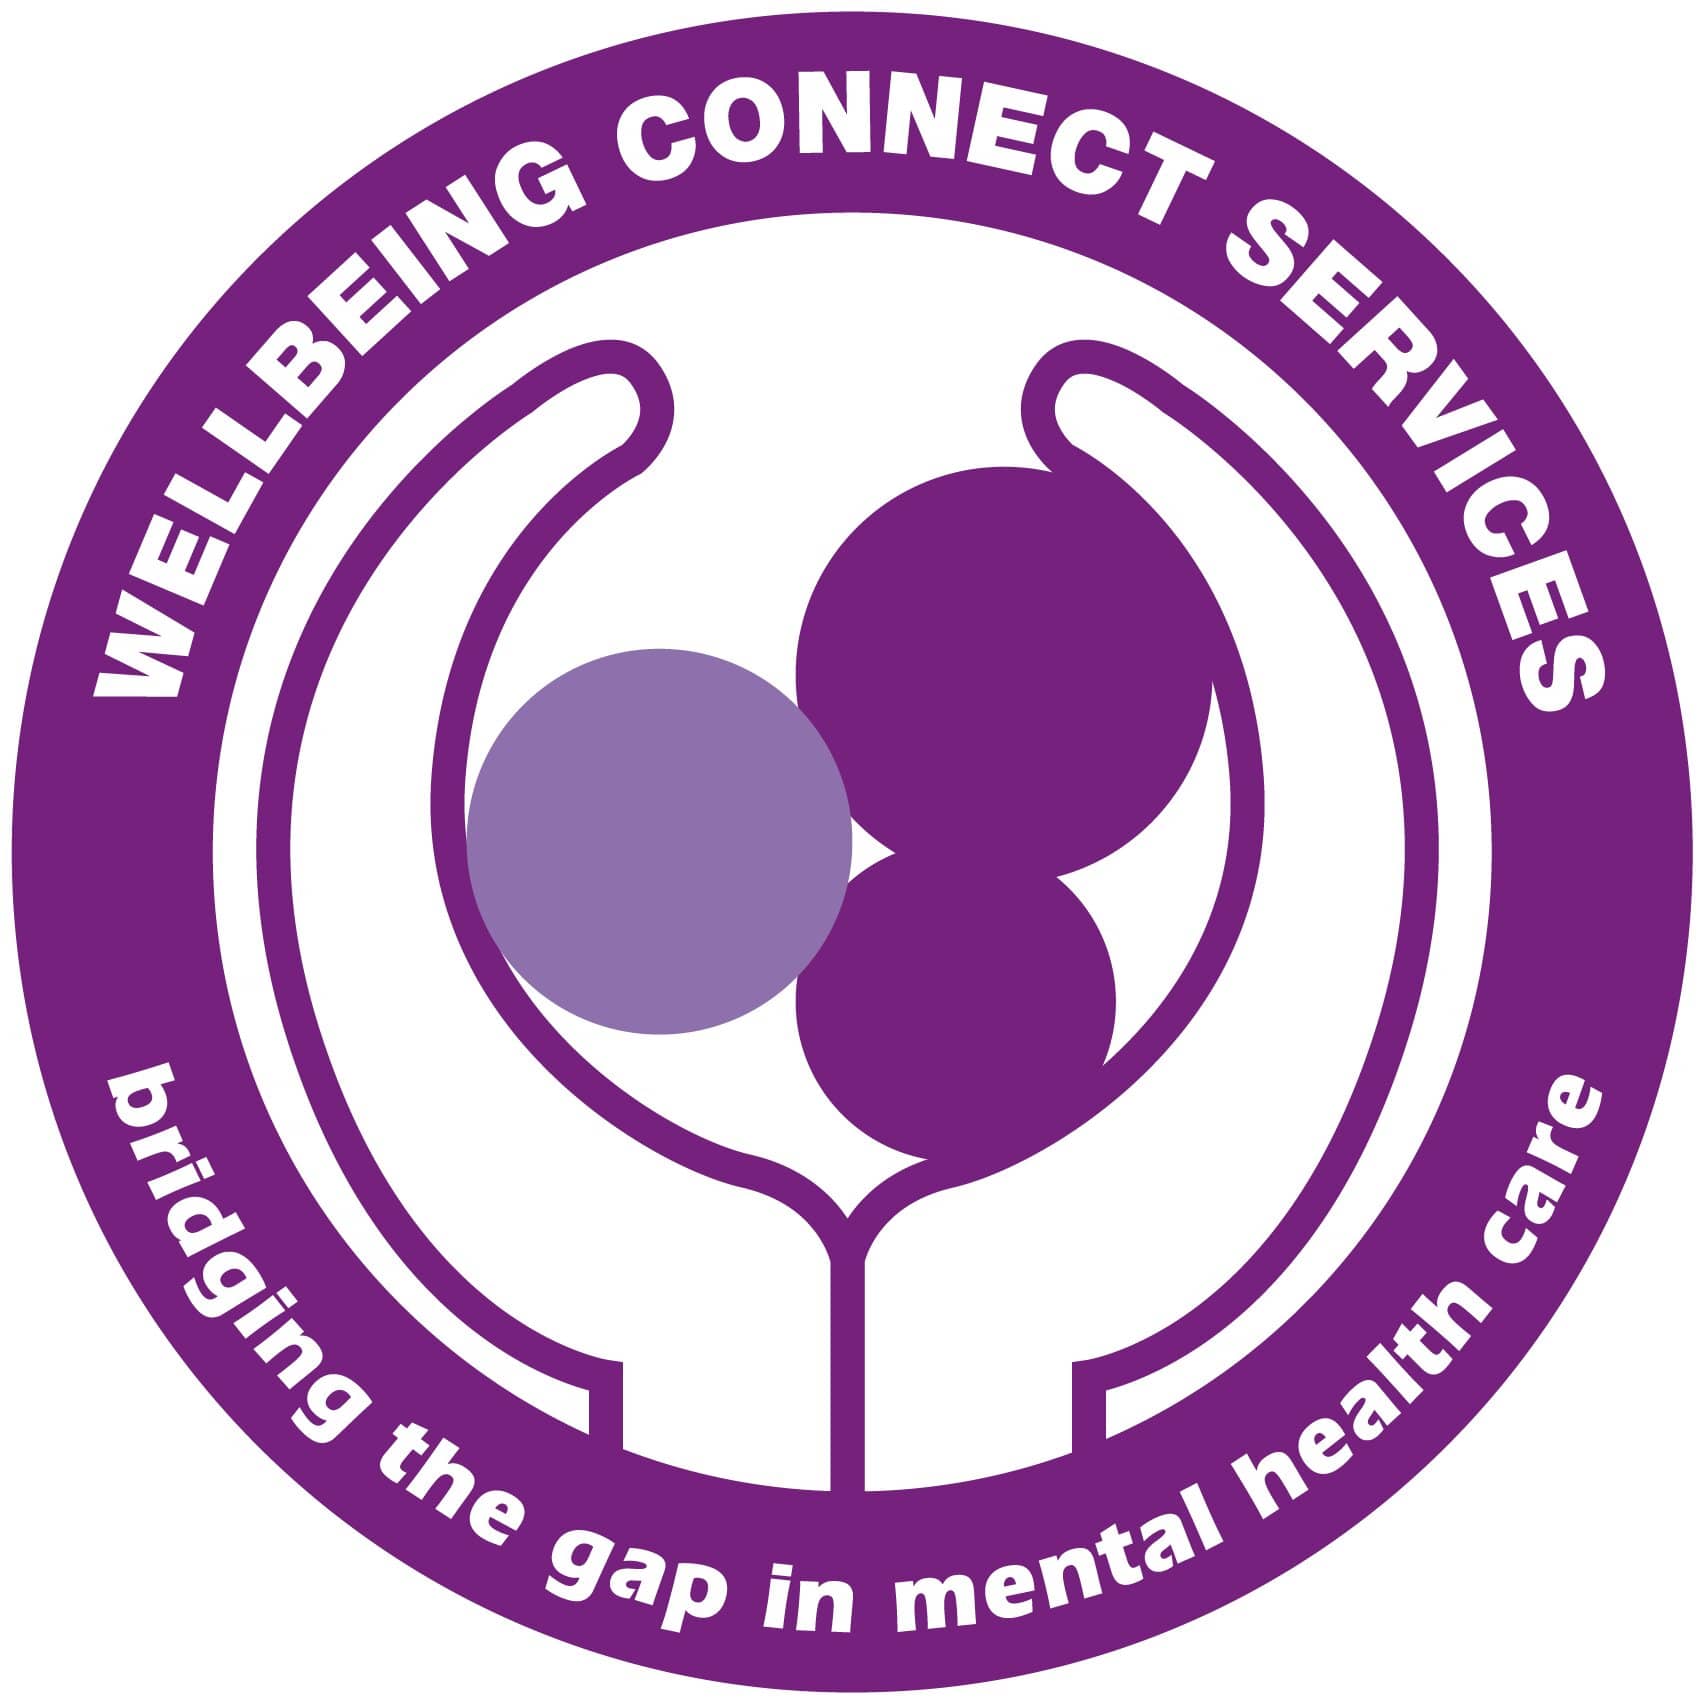 Winner Image - Wellbeing Connect Services